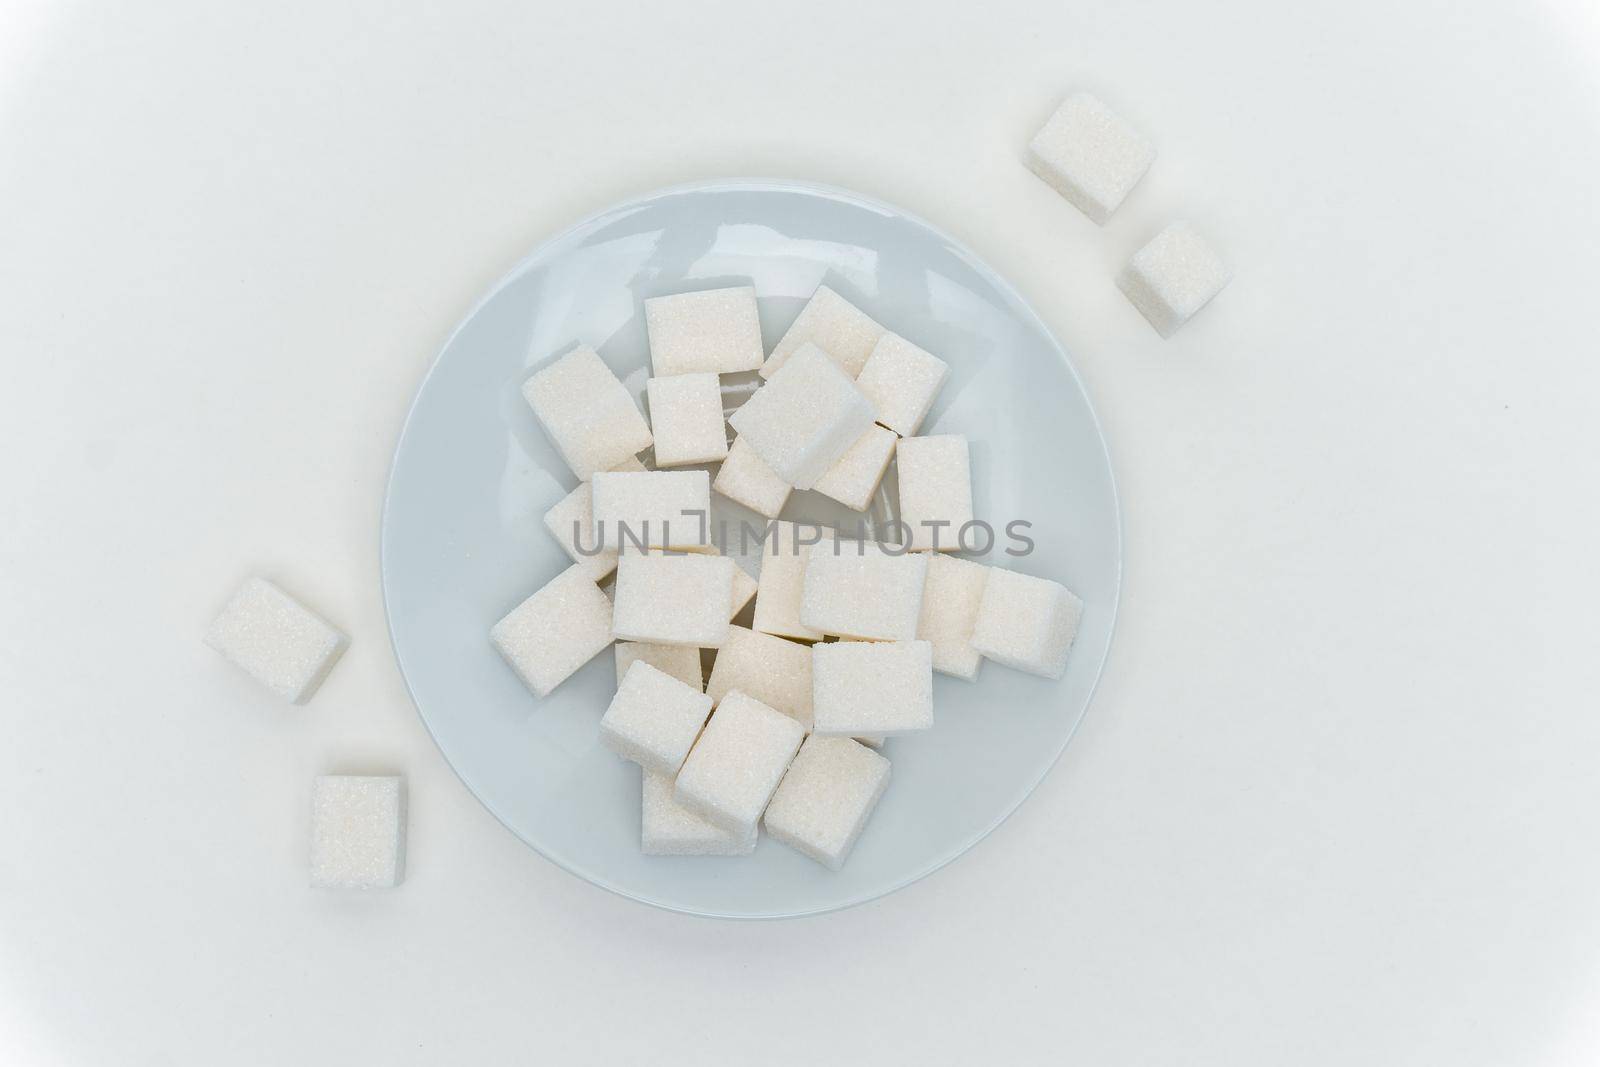 refined sugar cubes on a plate energy calories by SHOTPRIME